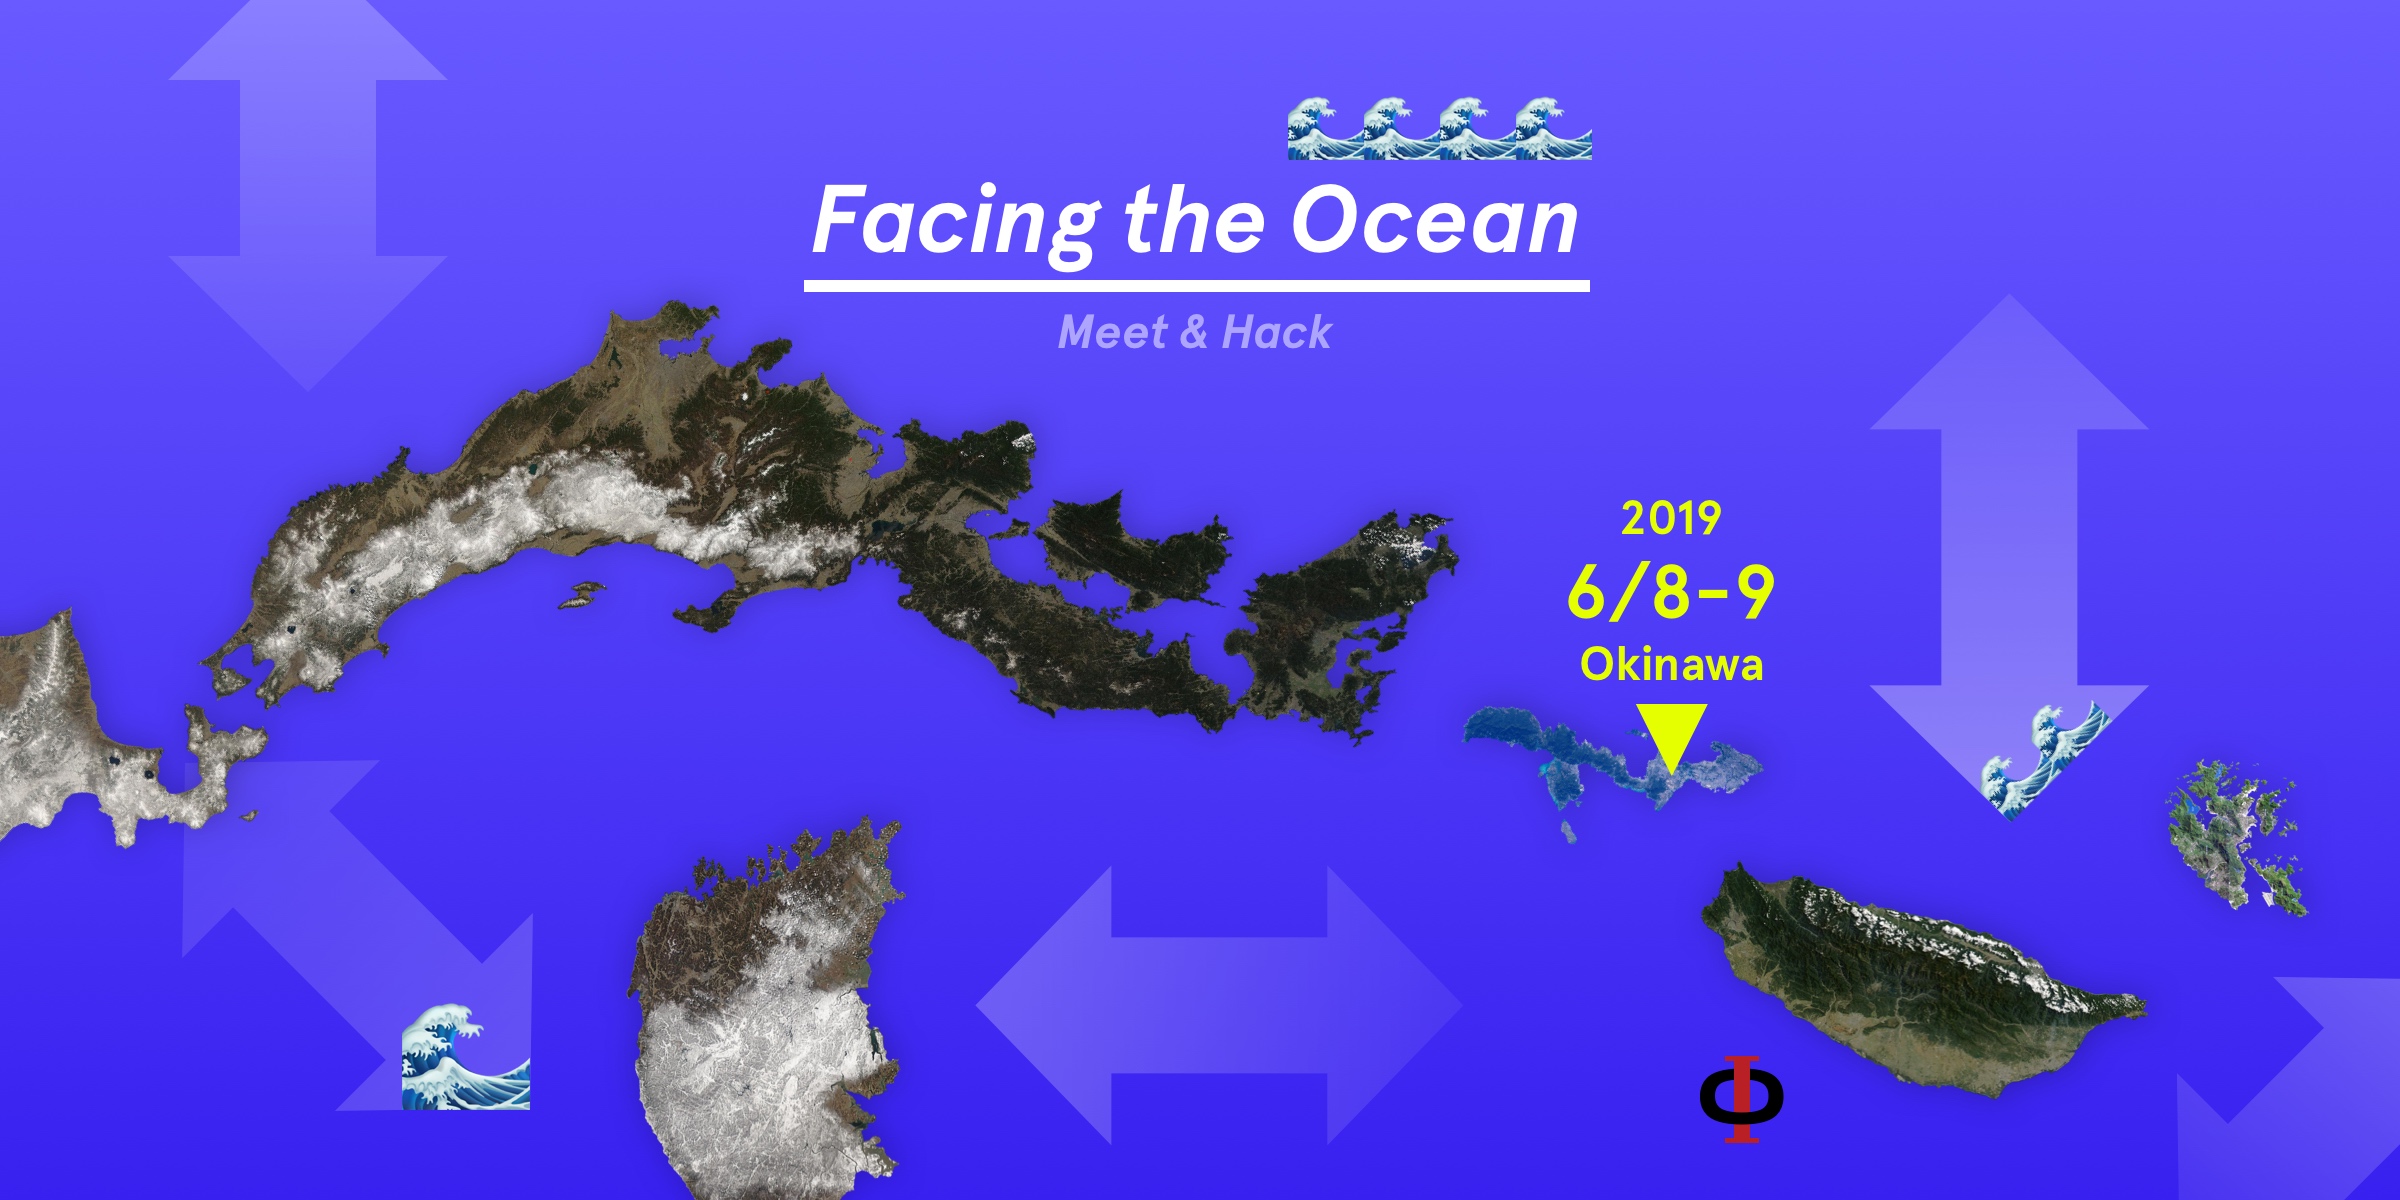 Event cover image for 國際出訪：Facing the Ocean Meet and Hack 面海黑客松 (沖繩)